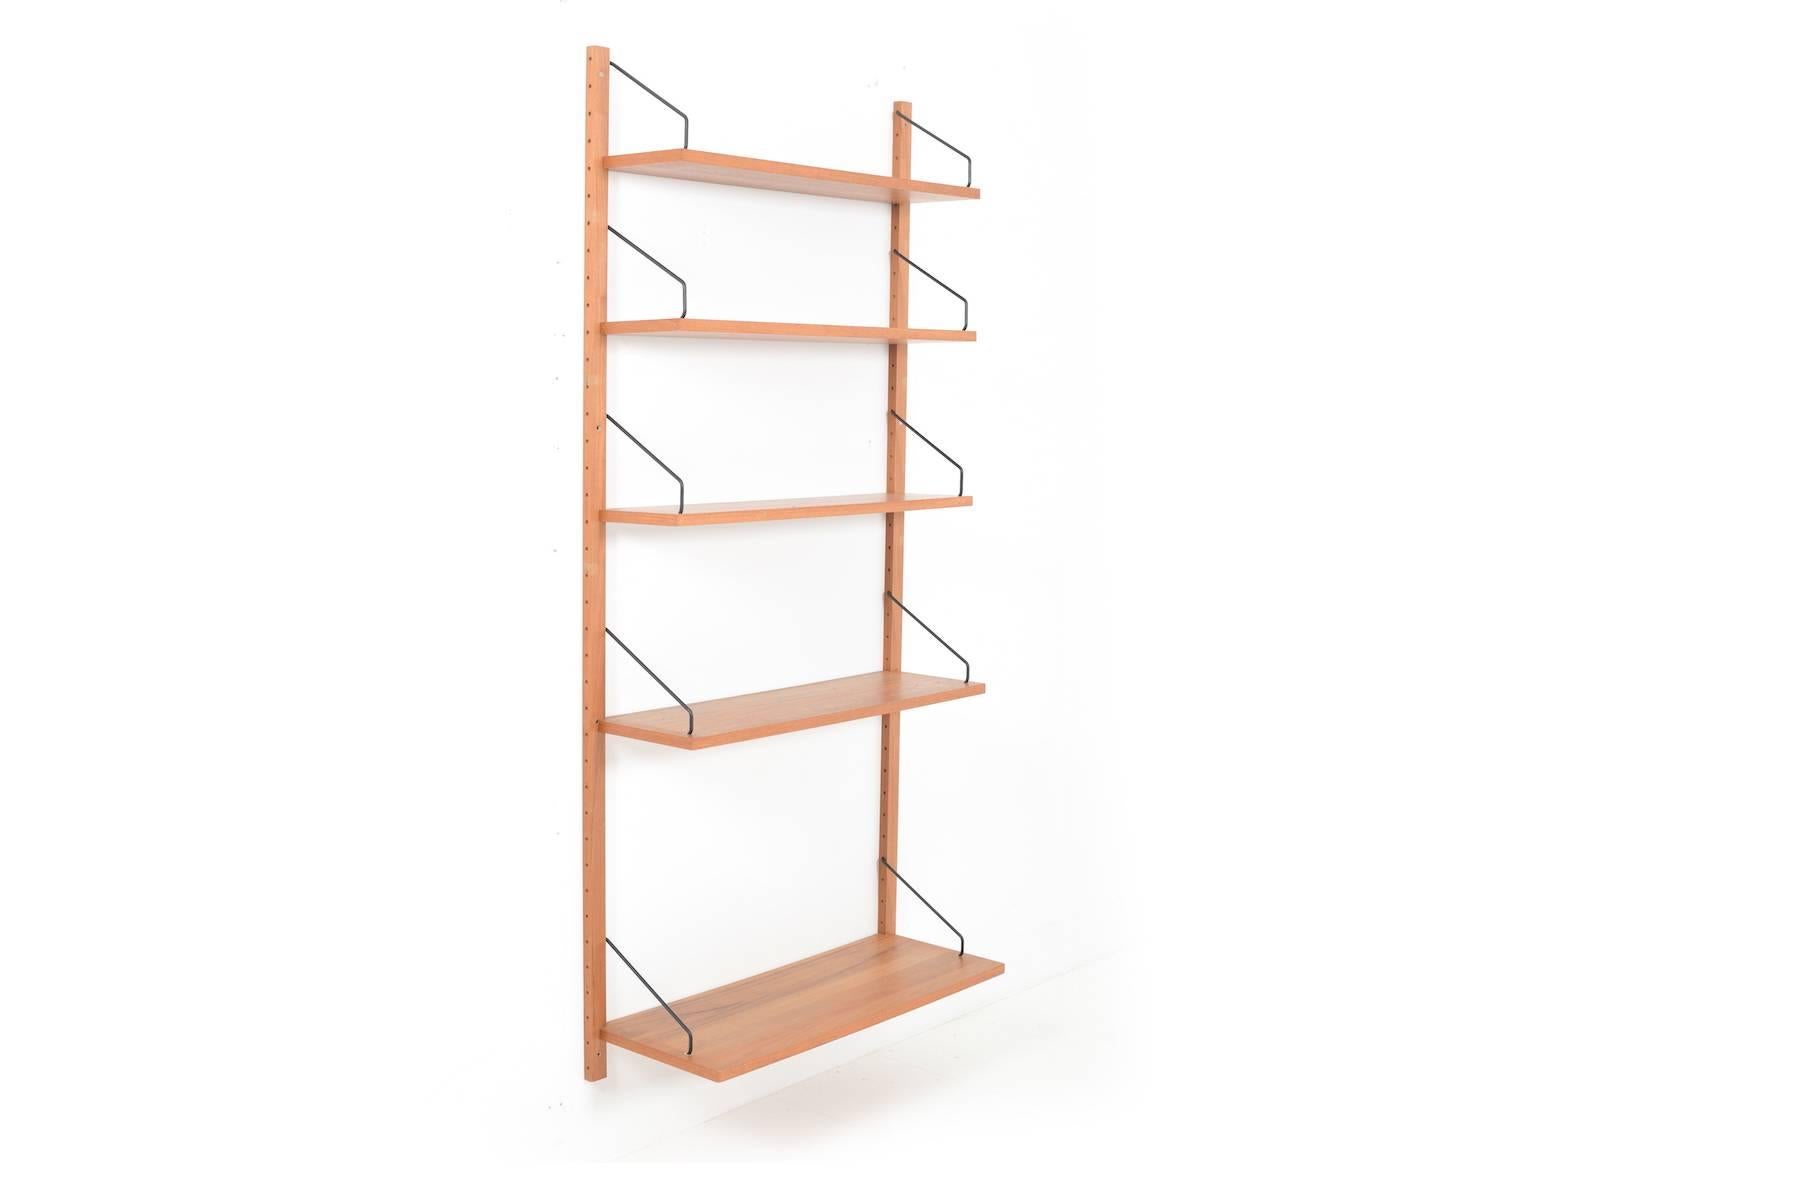 Cado wall or shelves in teak. Royal system. Designed by Poul Cadovius. Manufactured by Cado.
- Measures: Five shelves (3 x 80.0 x 20.5 cm / 1 x 80.0 x 24.0 cm / 1 x 80.0 x 30.0 cm)
- Two wall brackets.